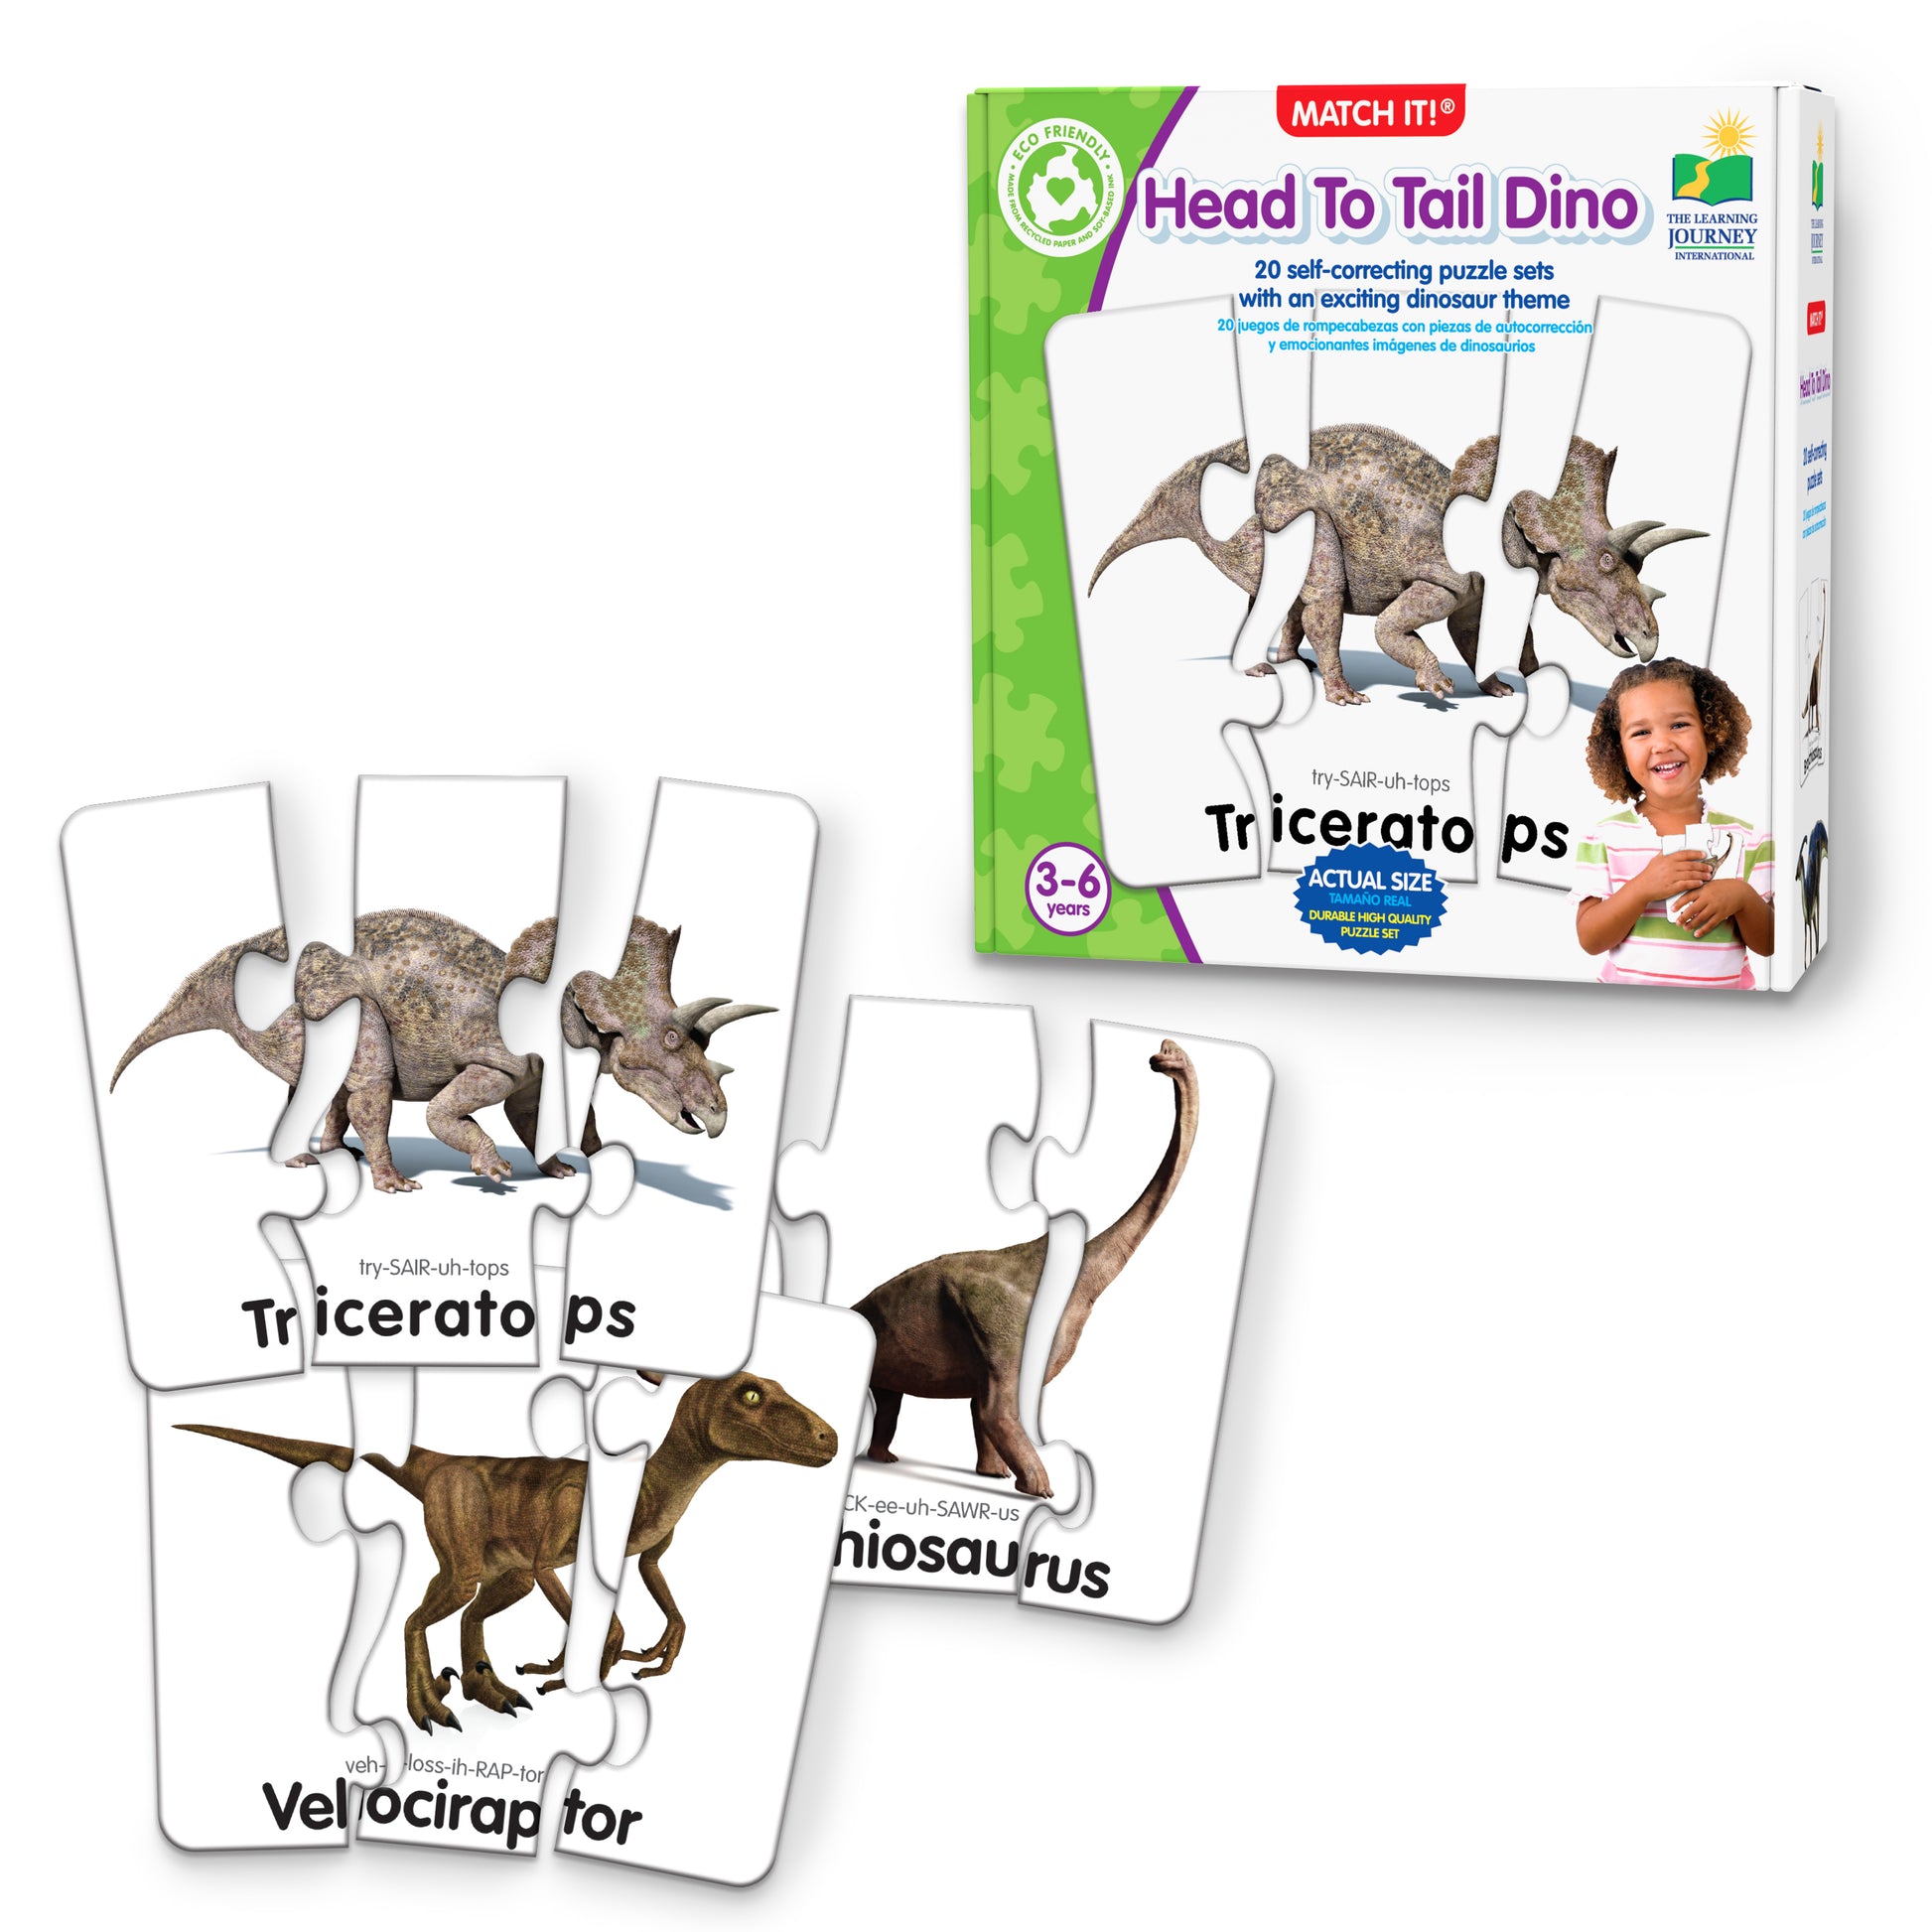 Match It - Head to Tail Dinos product and packaging